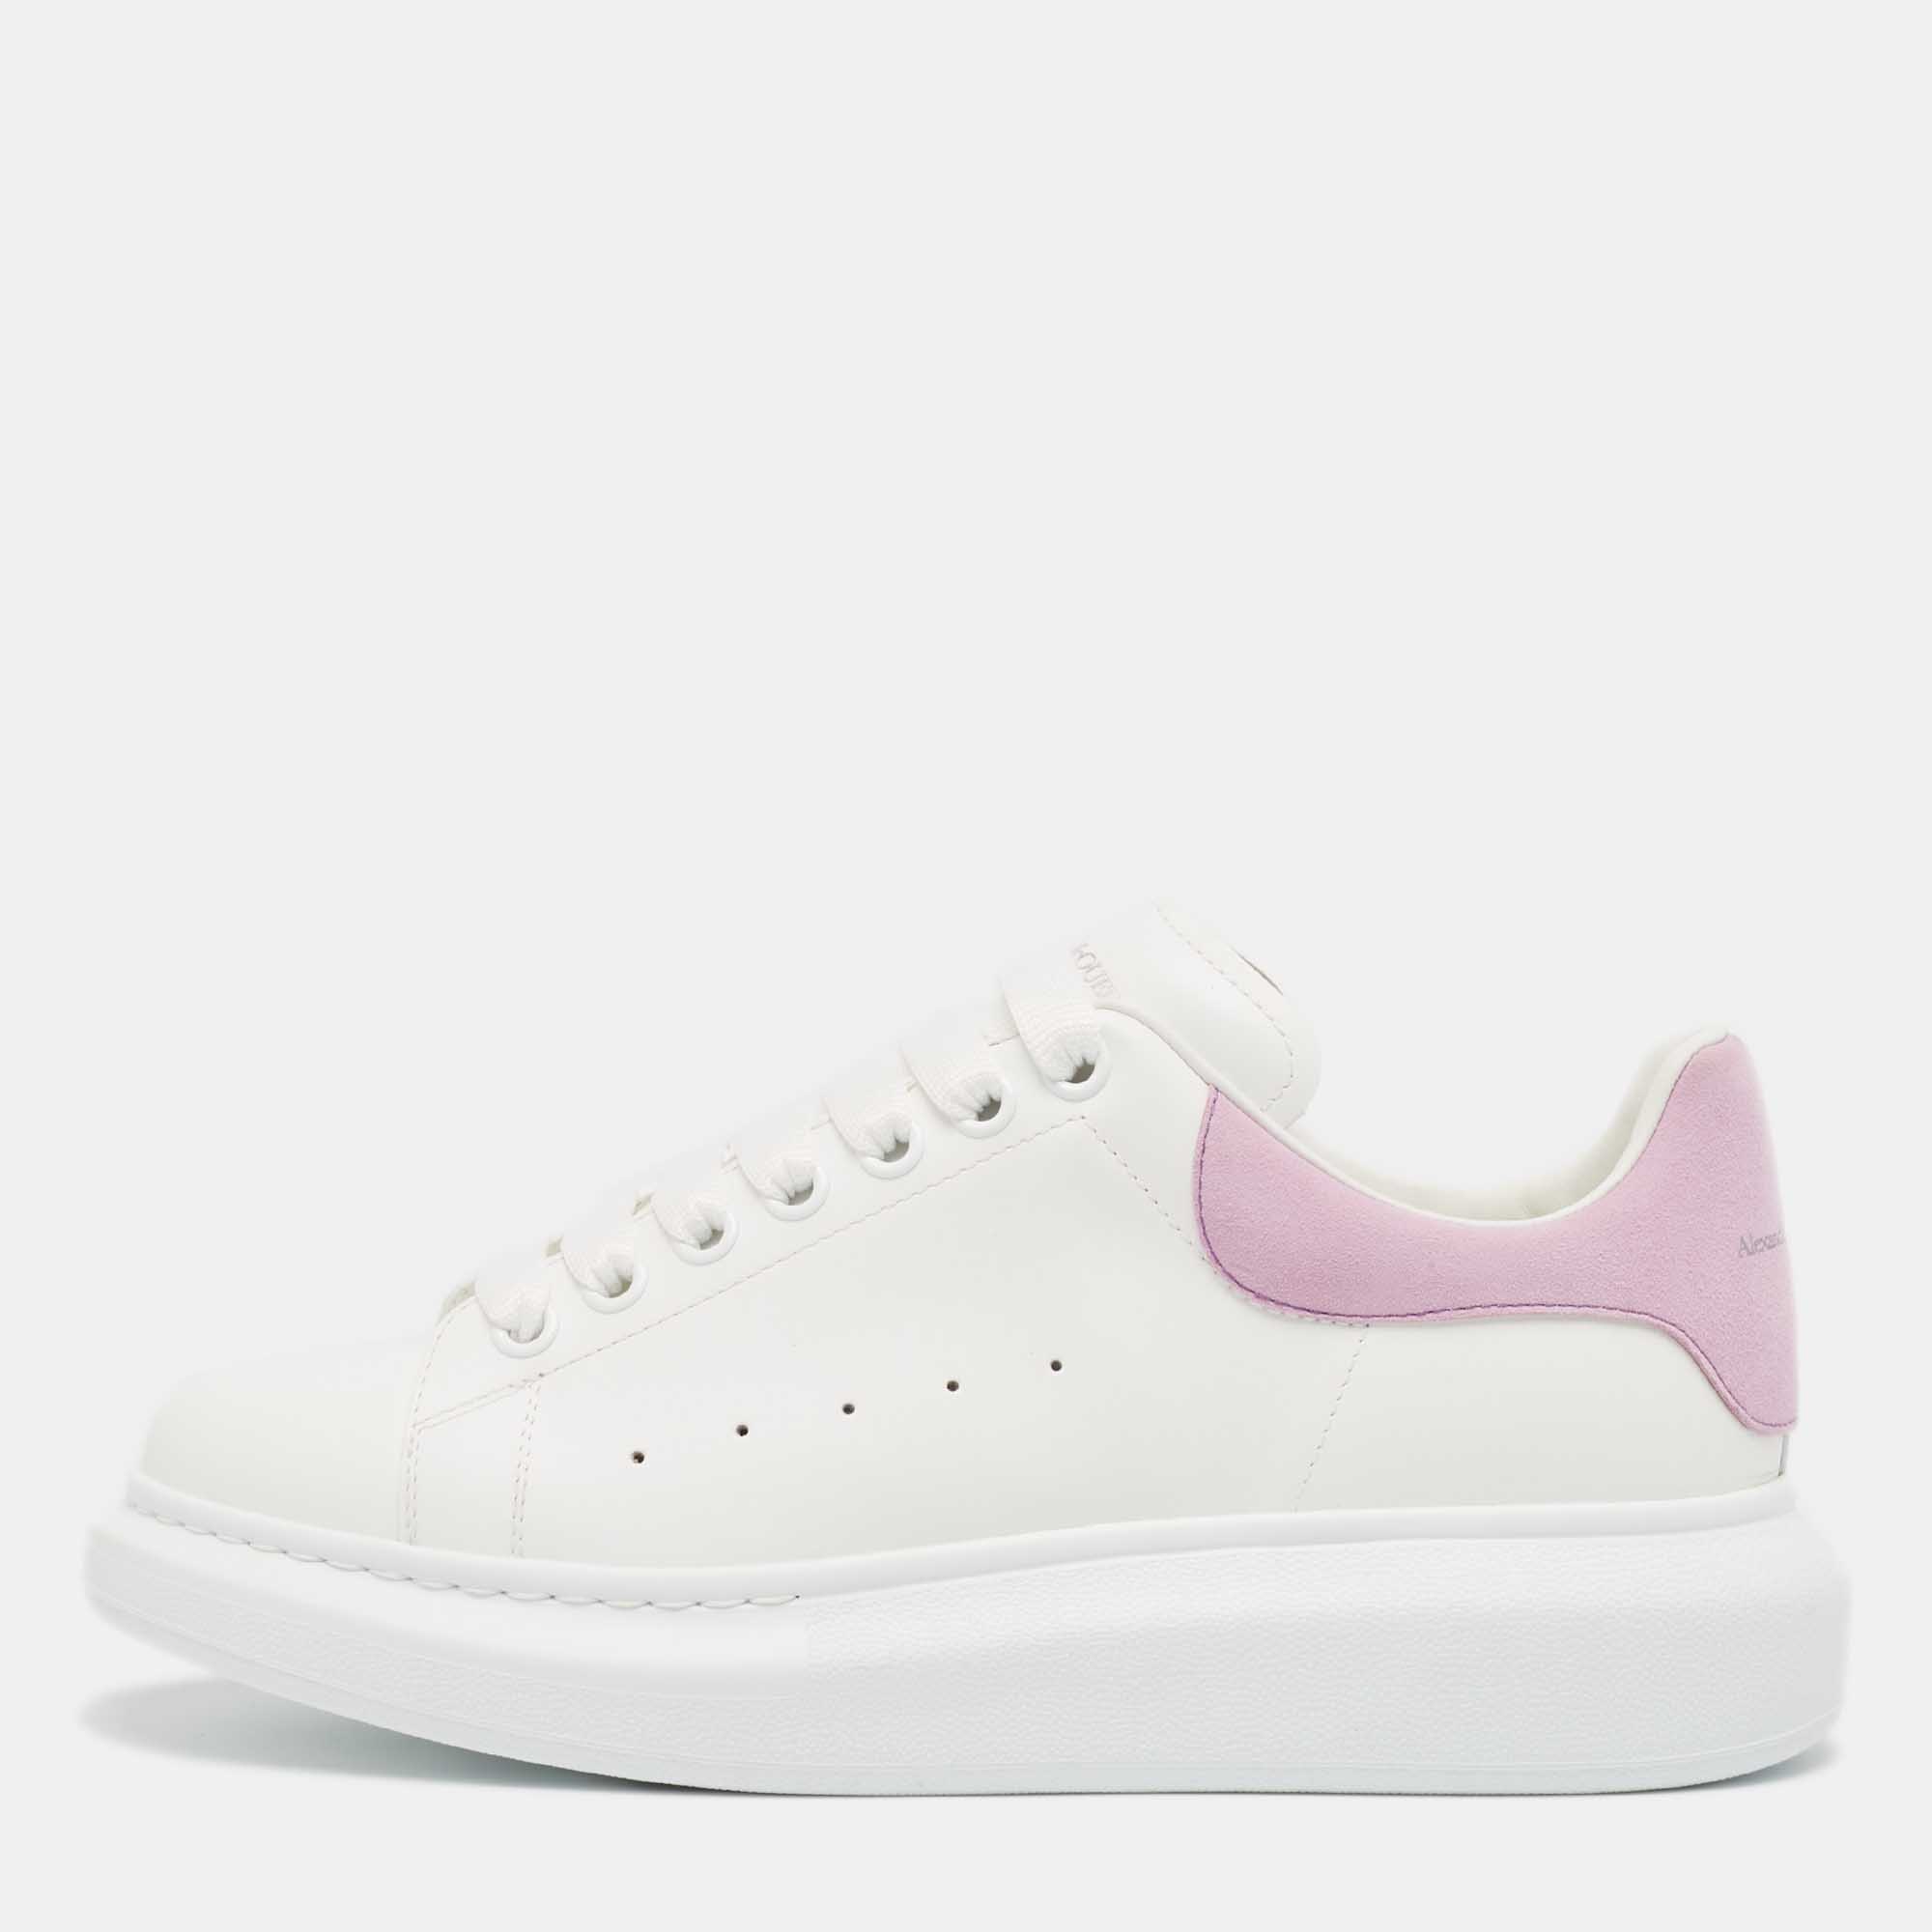 Alexander mcqueen white/purples  leather oversized sneakers size 41